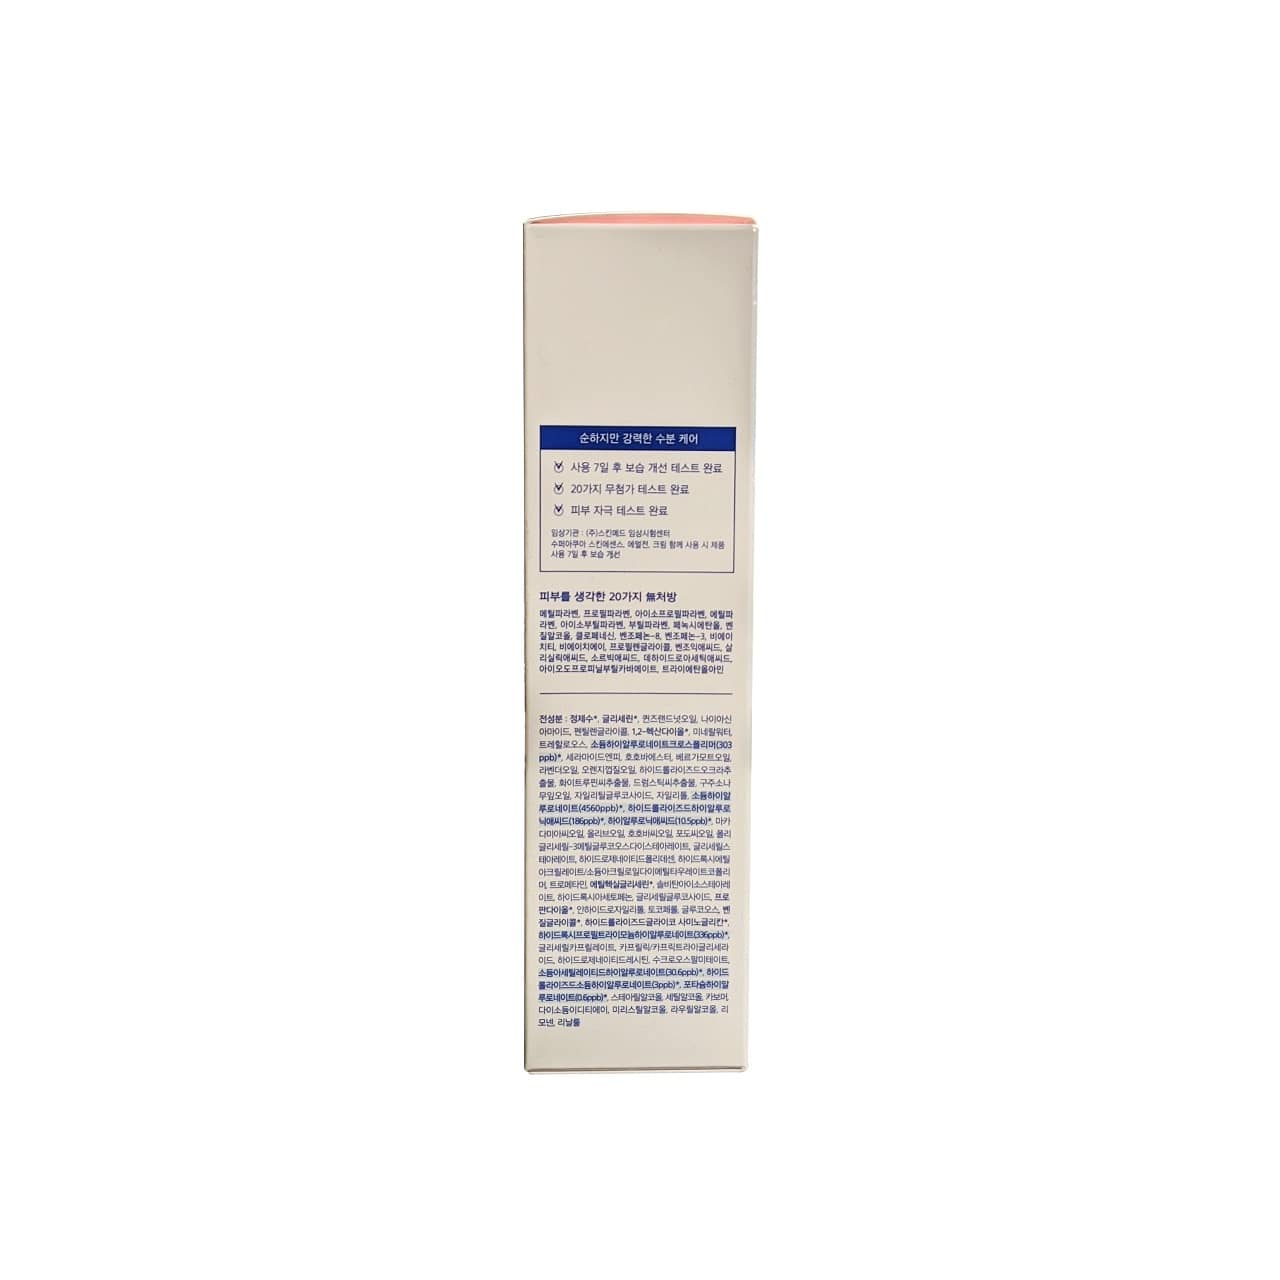 Direction, caution, and ingredients for MISSHA Super Aqua Ultra Hyalron Emulsion (130 mL) in French